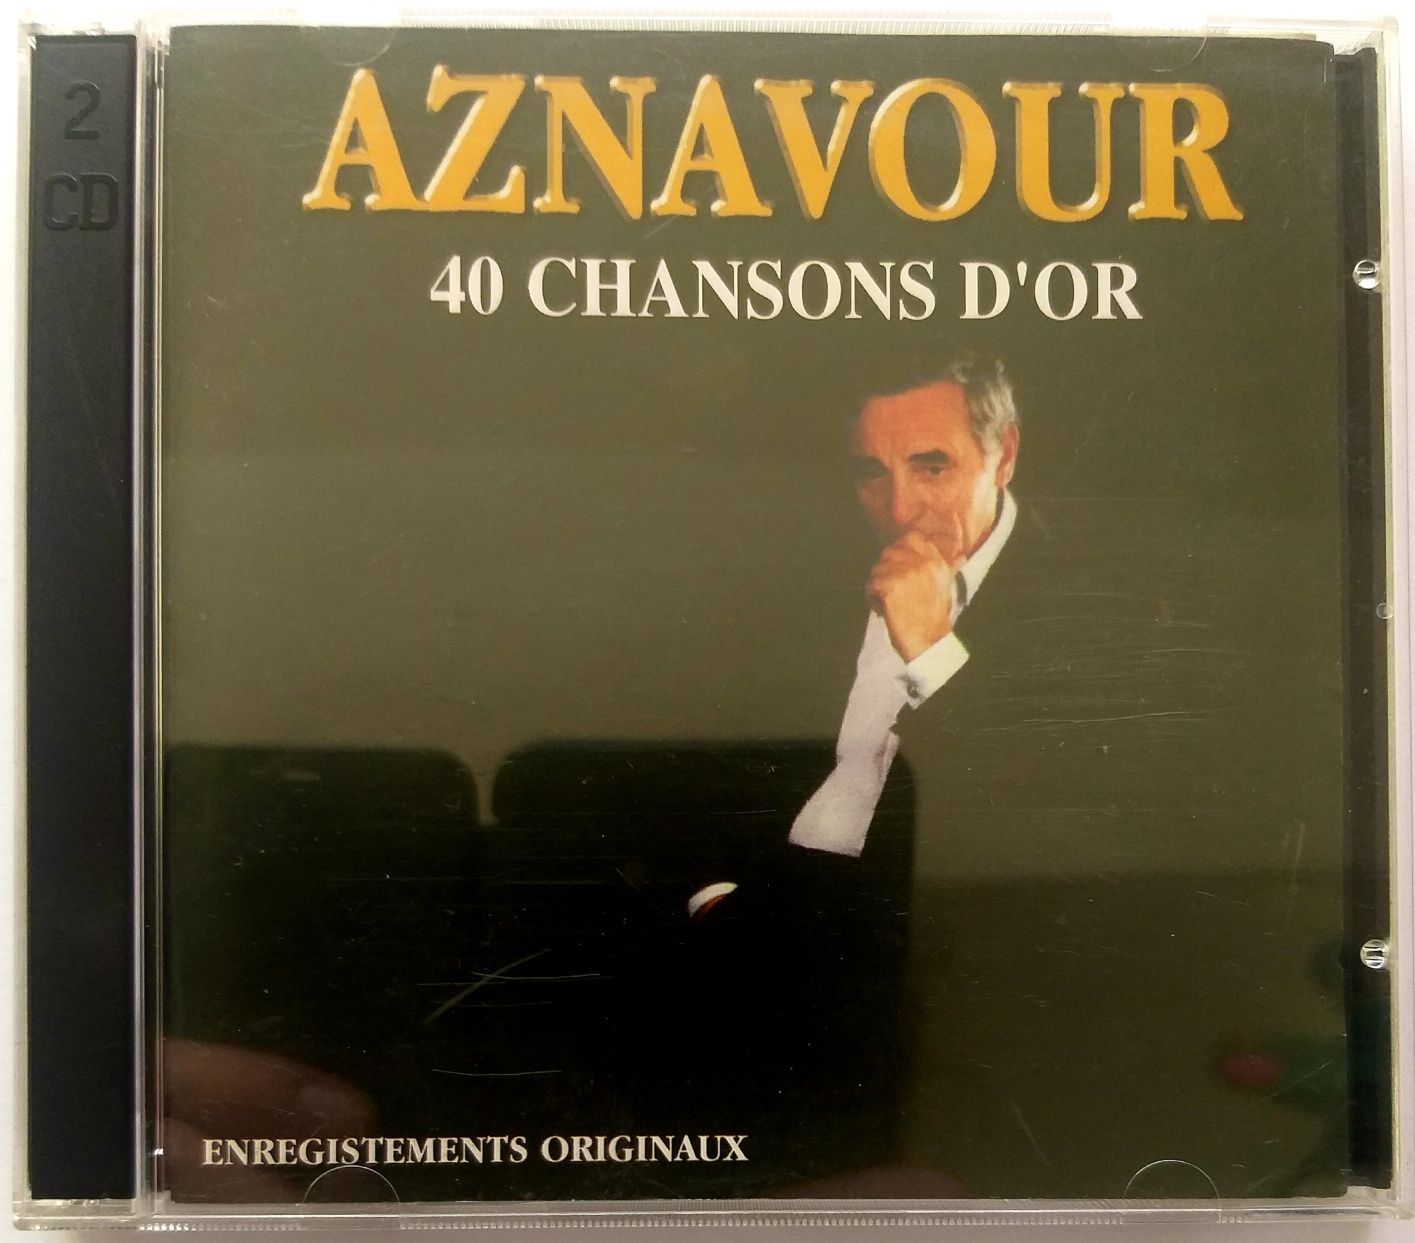 Aznavour 40 Chansons D'or 2CD 1994r